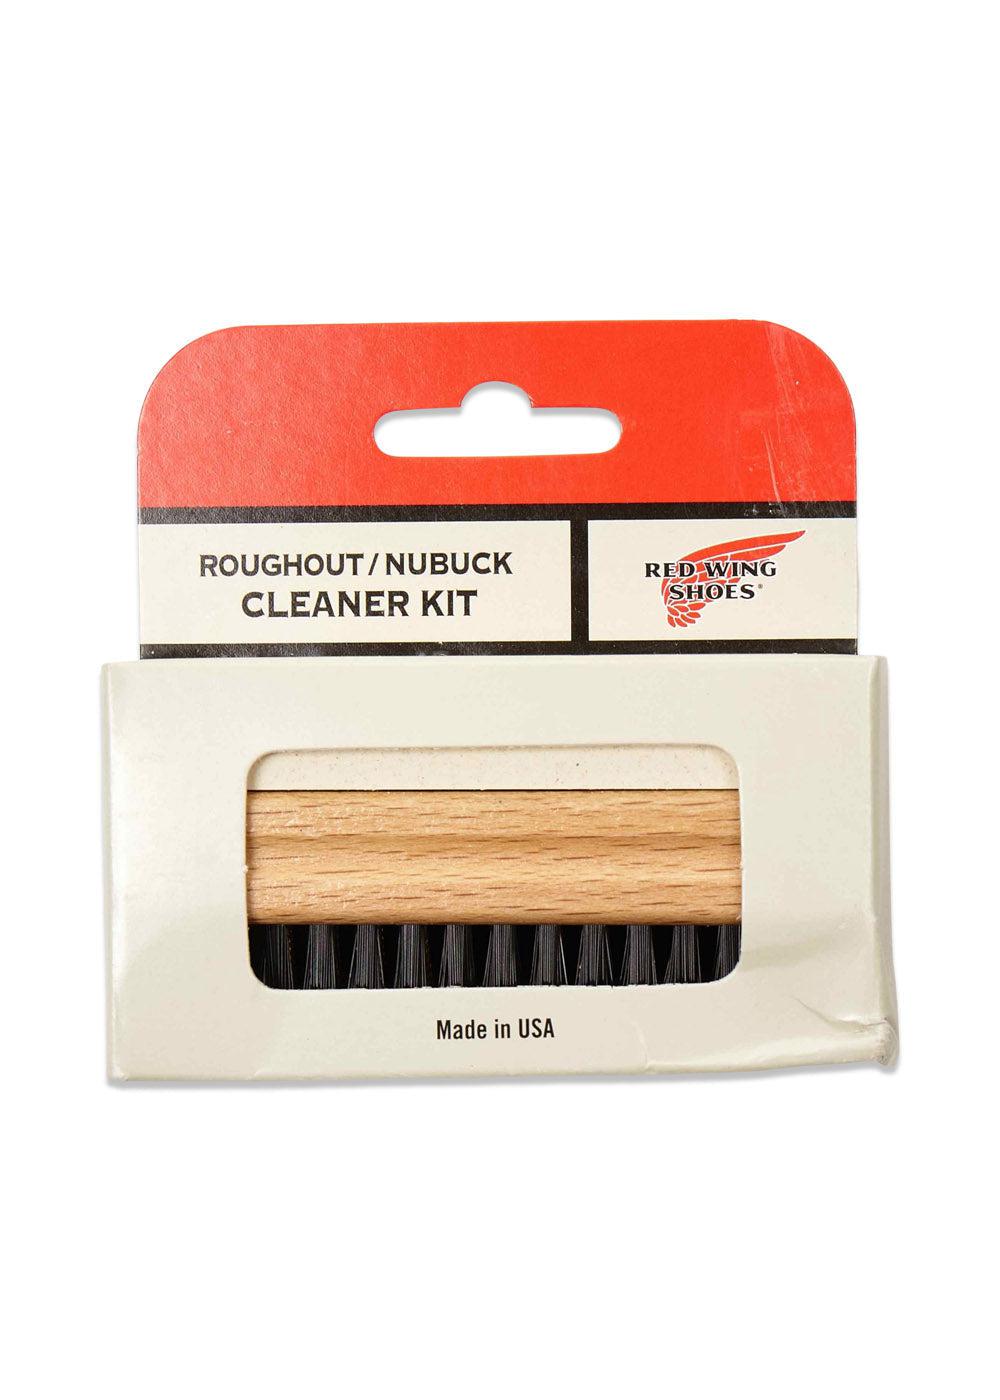 Red Wings Roughout/ Nubuck Cleaner kit - Multi. Køb accessories her.